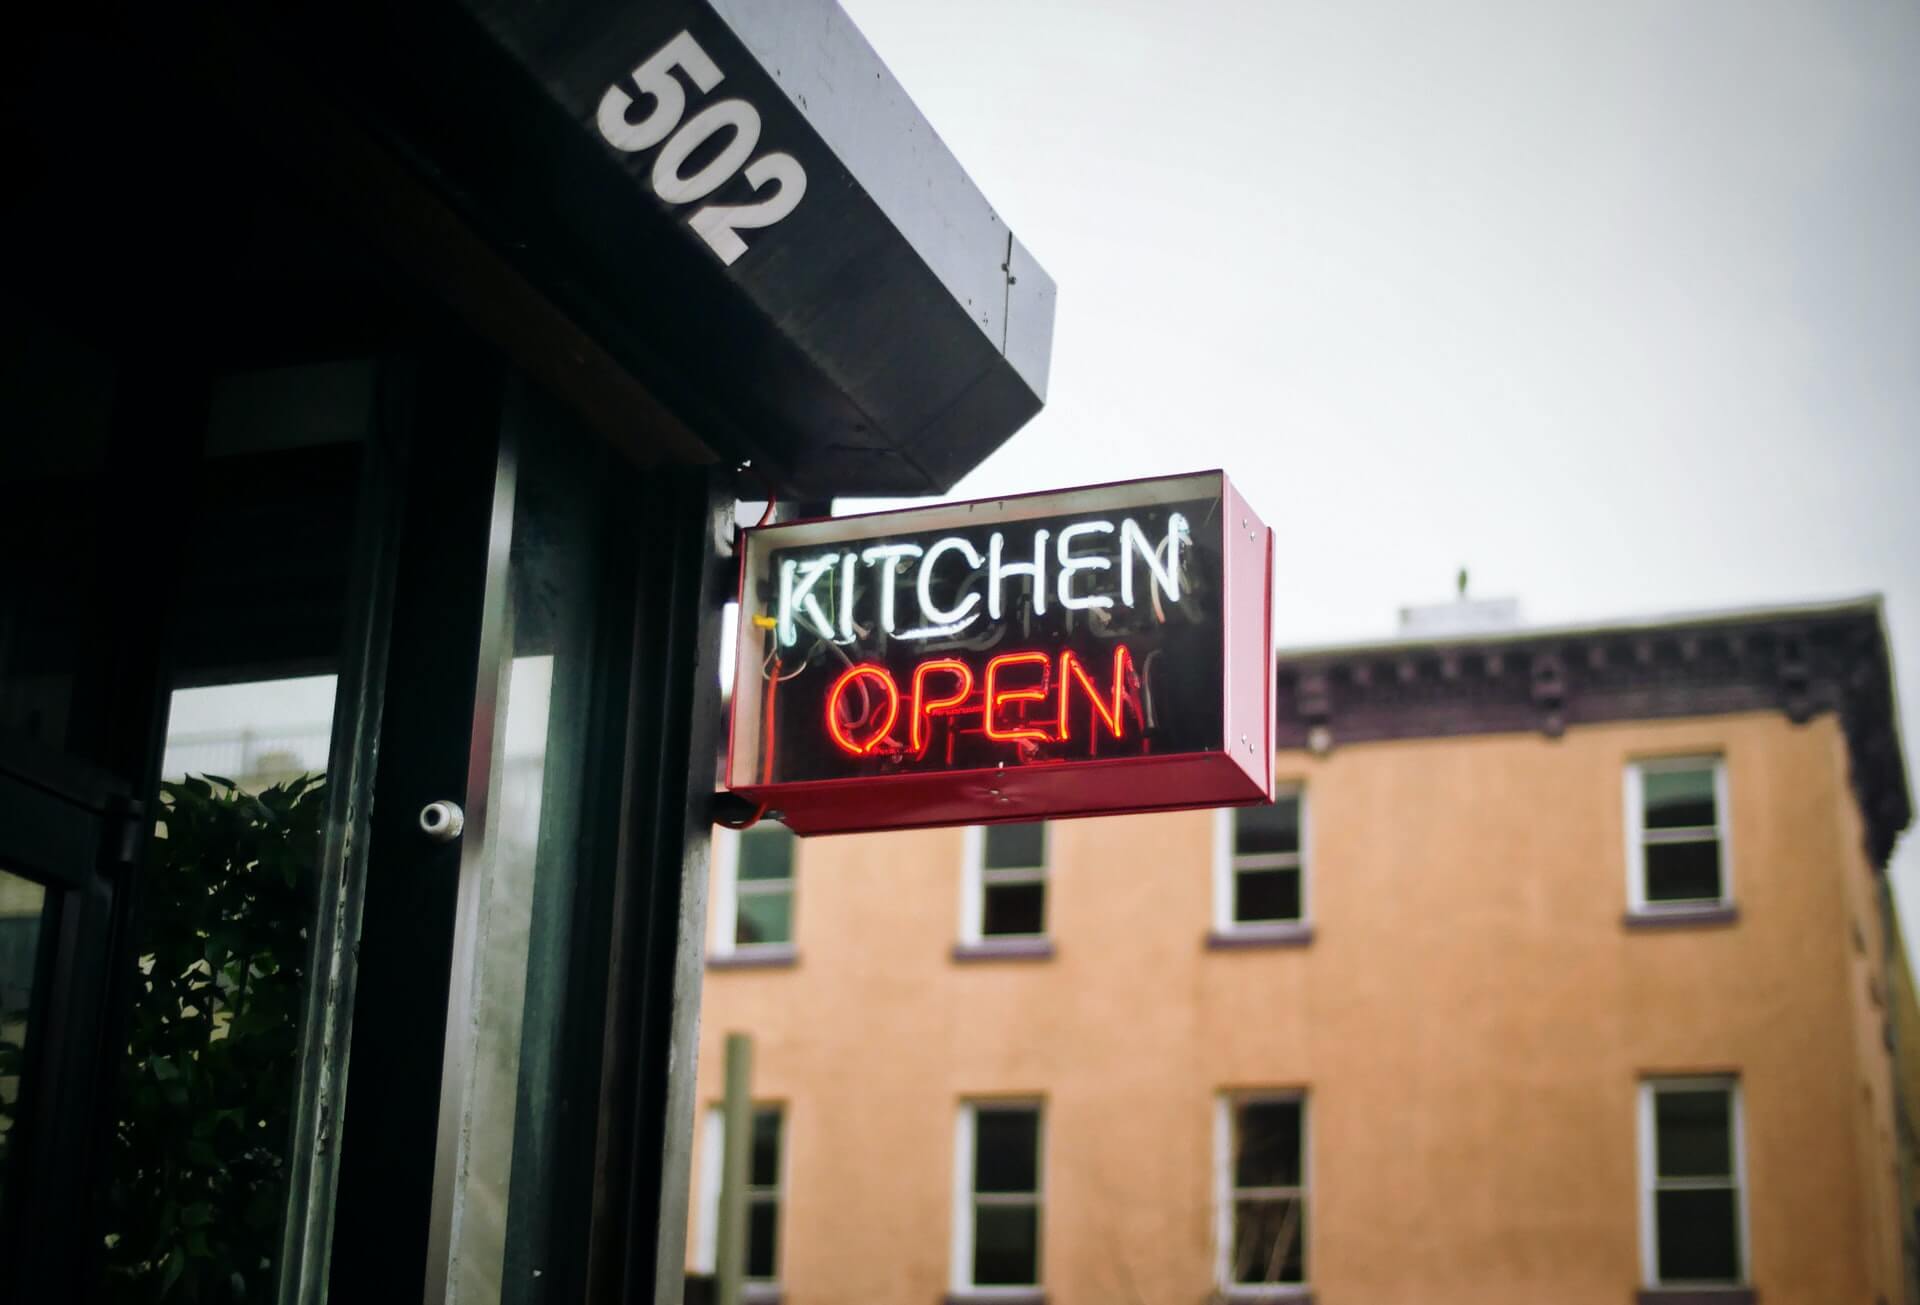 White and red neon restaurant sign that reads "Kitchen Open"